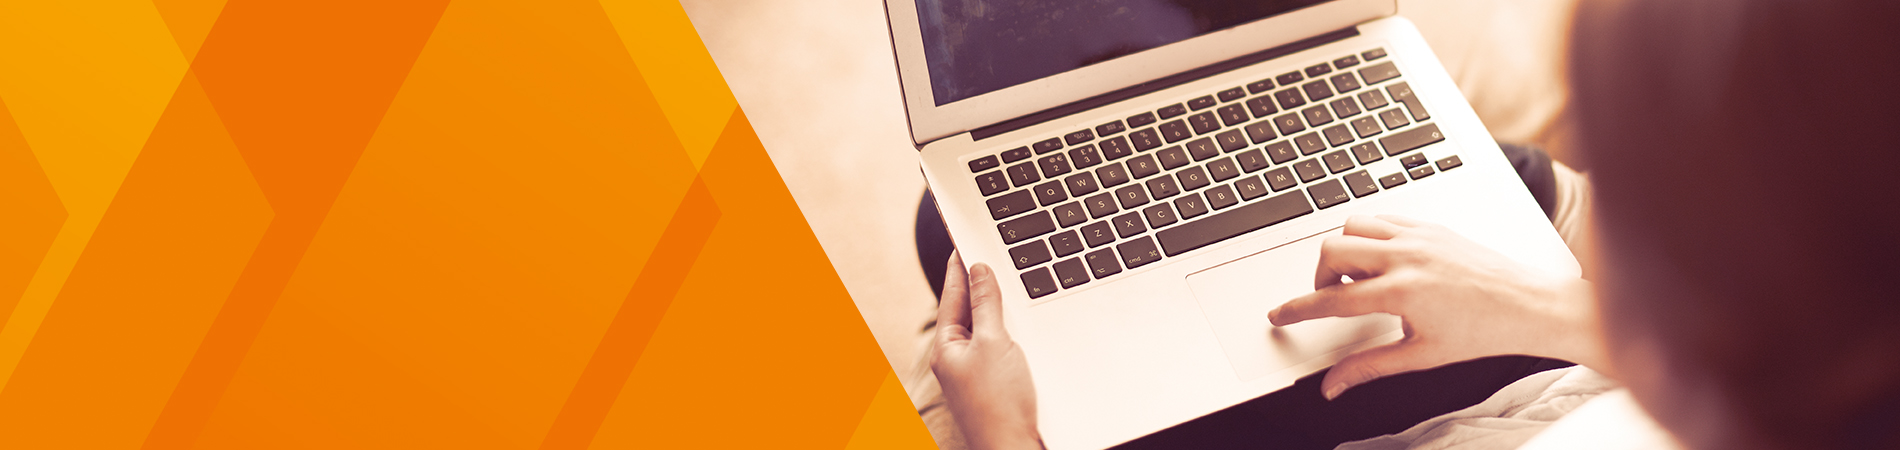 Orange banner with person using laptop